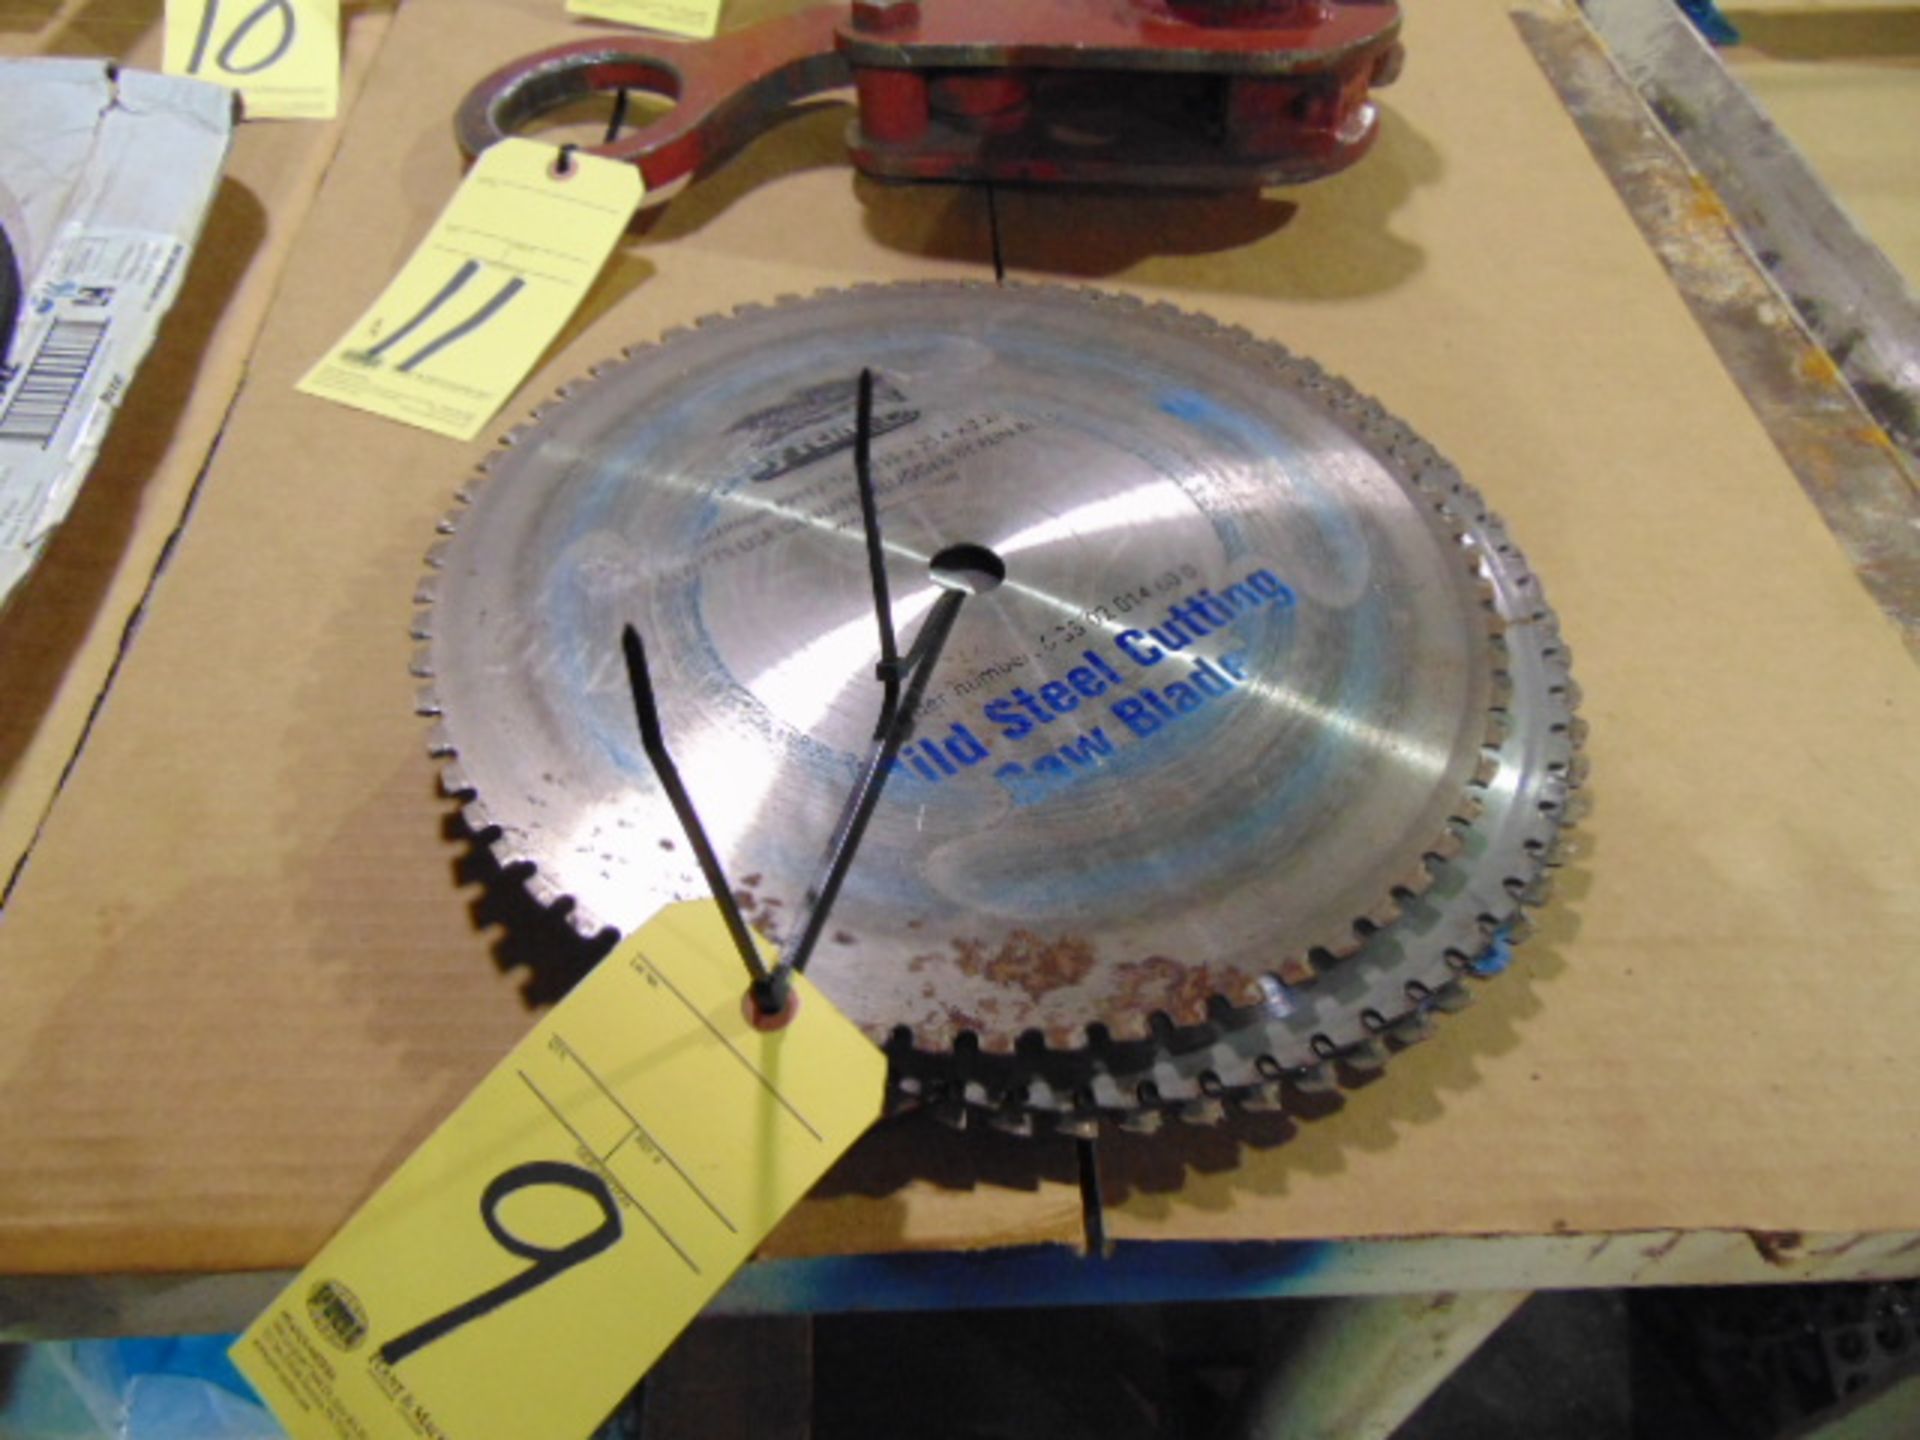 LOT OF SAW BLADES, 14"